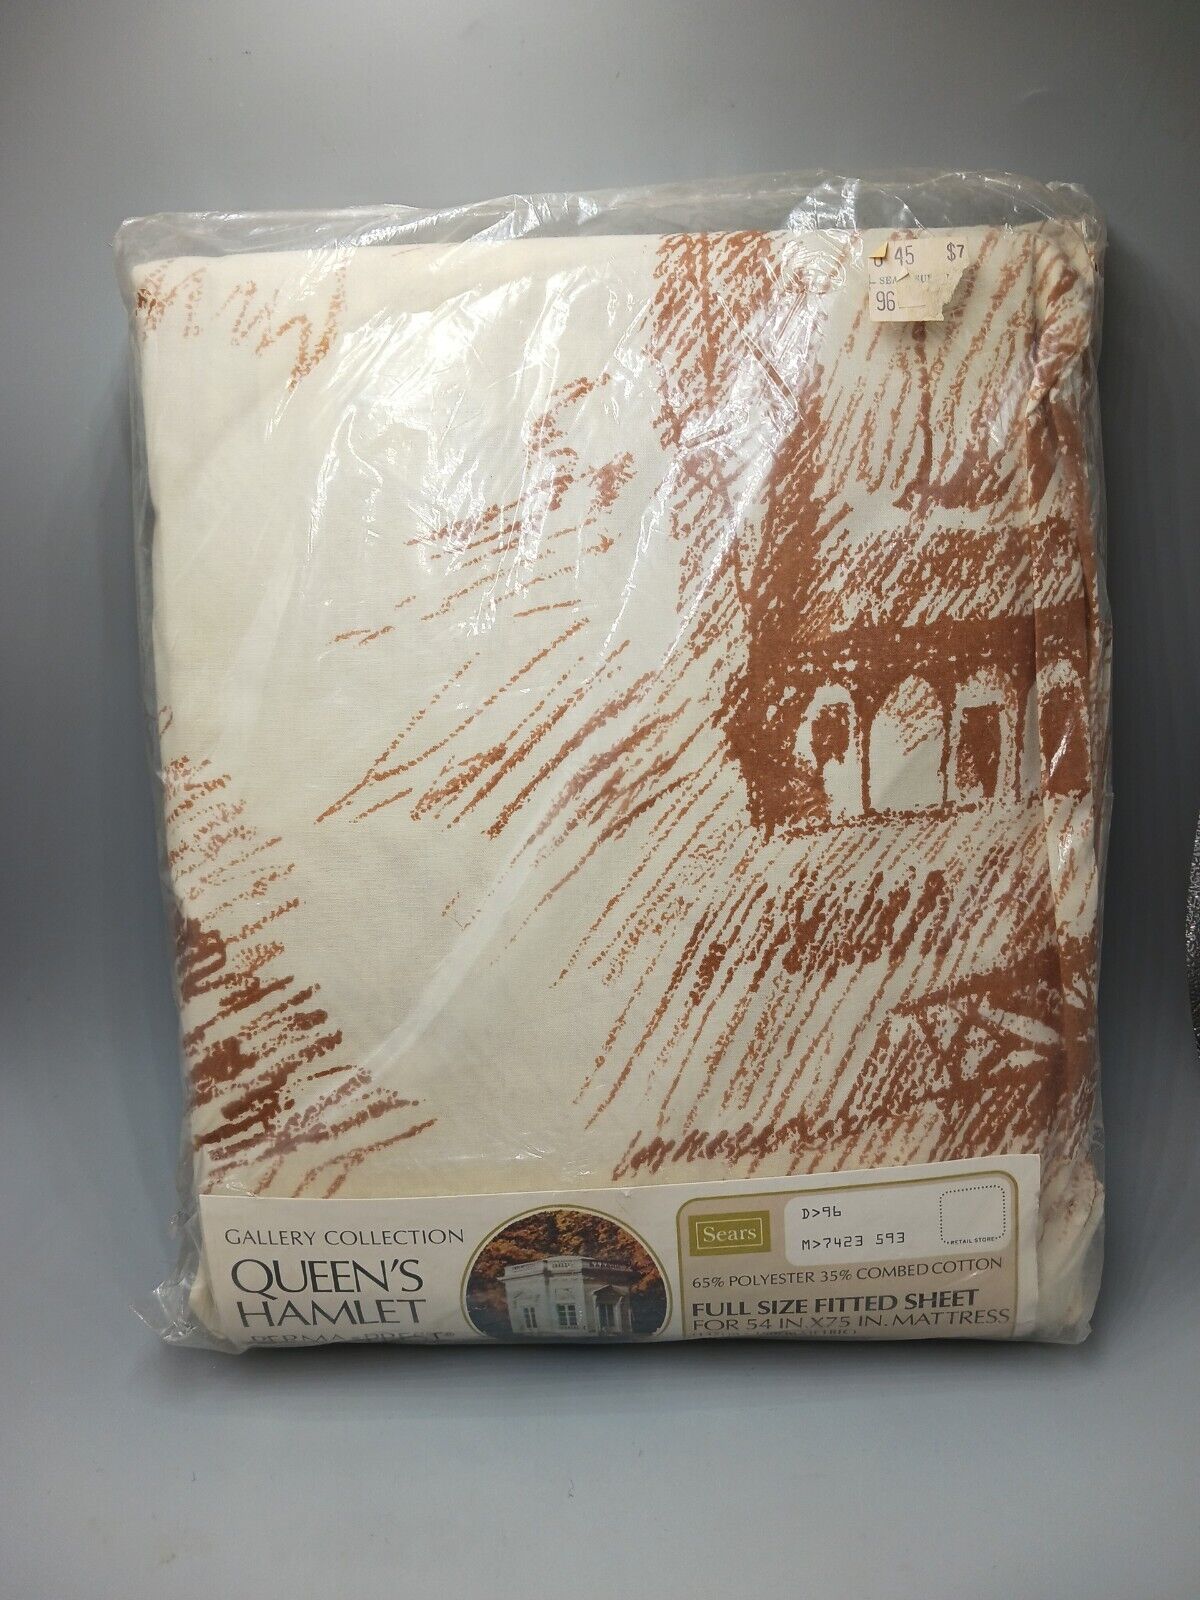 Vintage Sears Bed Sheet Full Fitted Queen's Hamlet Percale